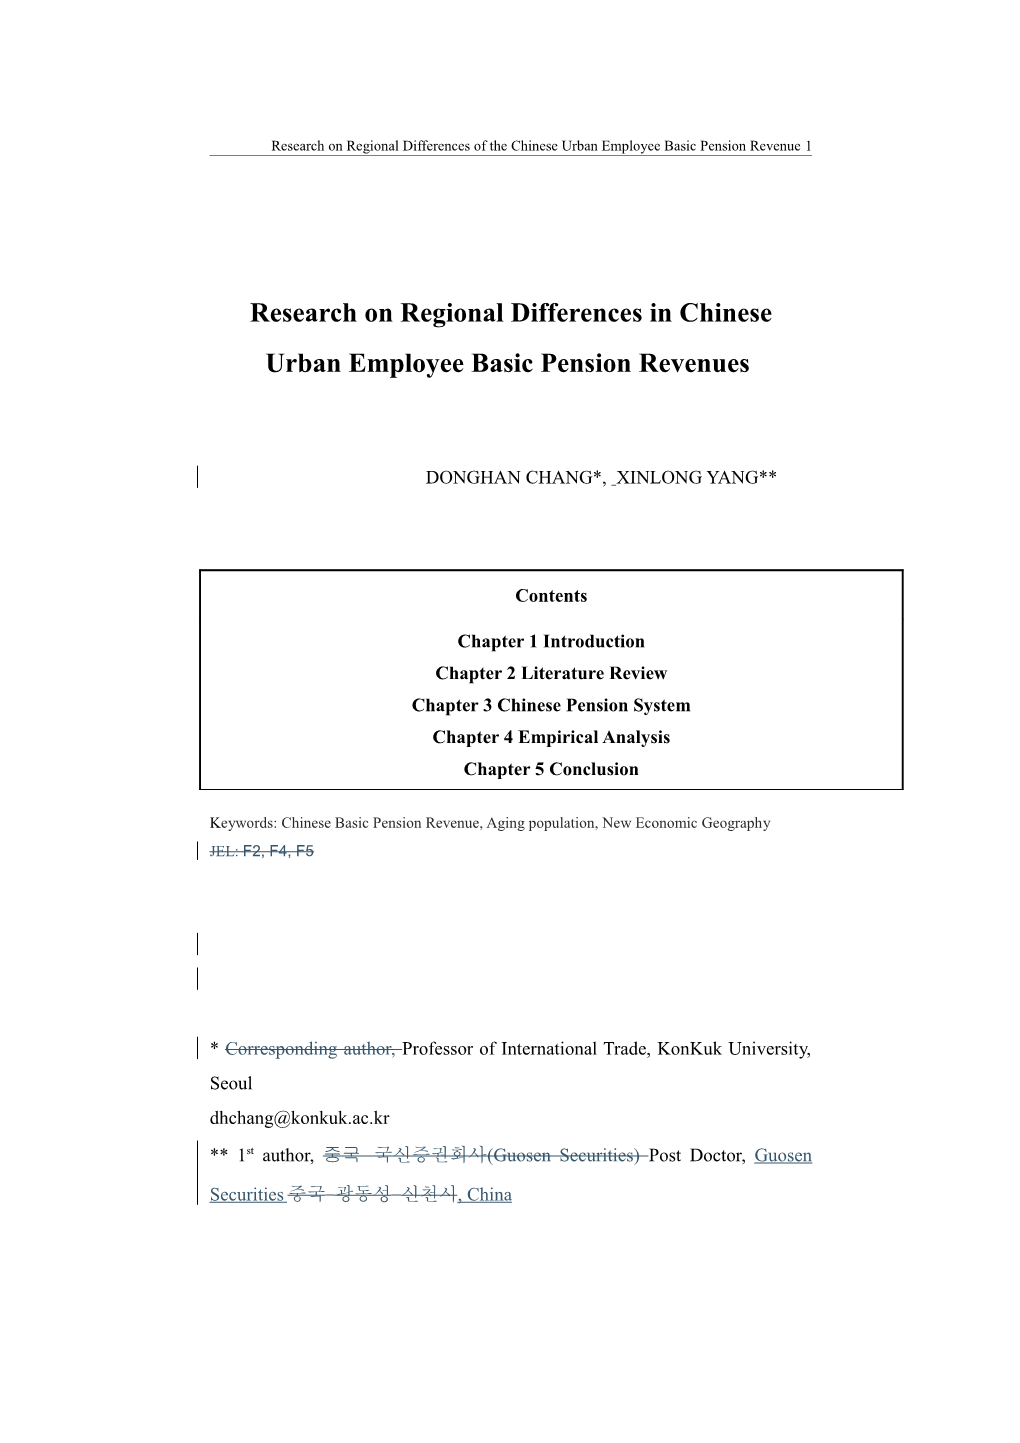 Research on Regional Differences in Chinese Urban Employee Basic Pension Revenues